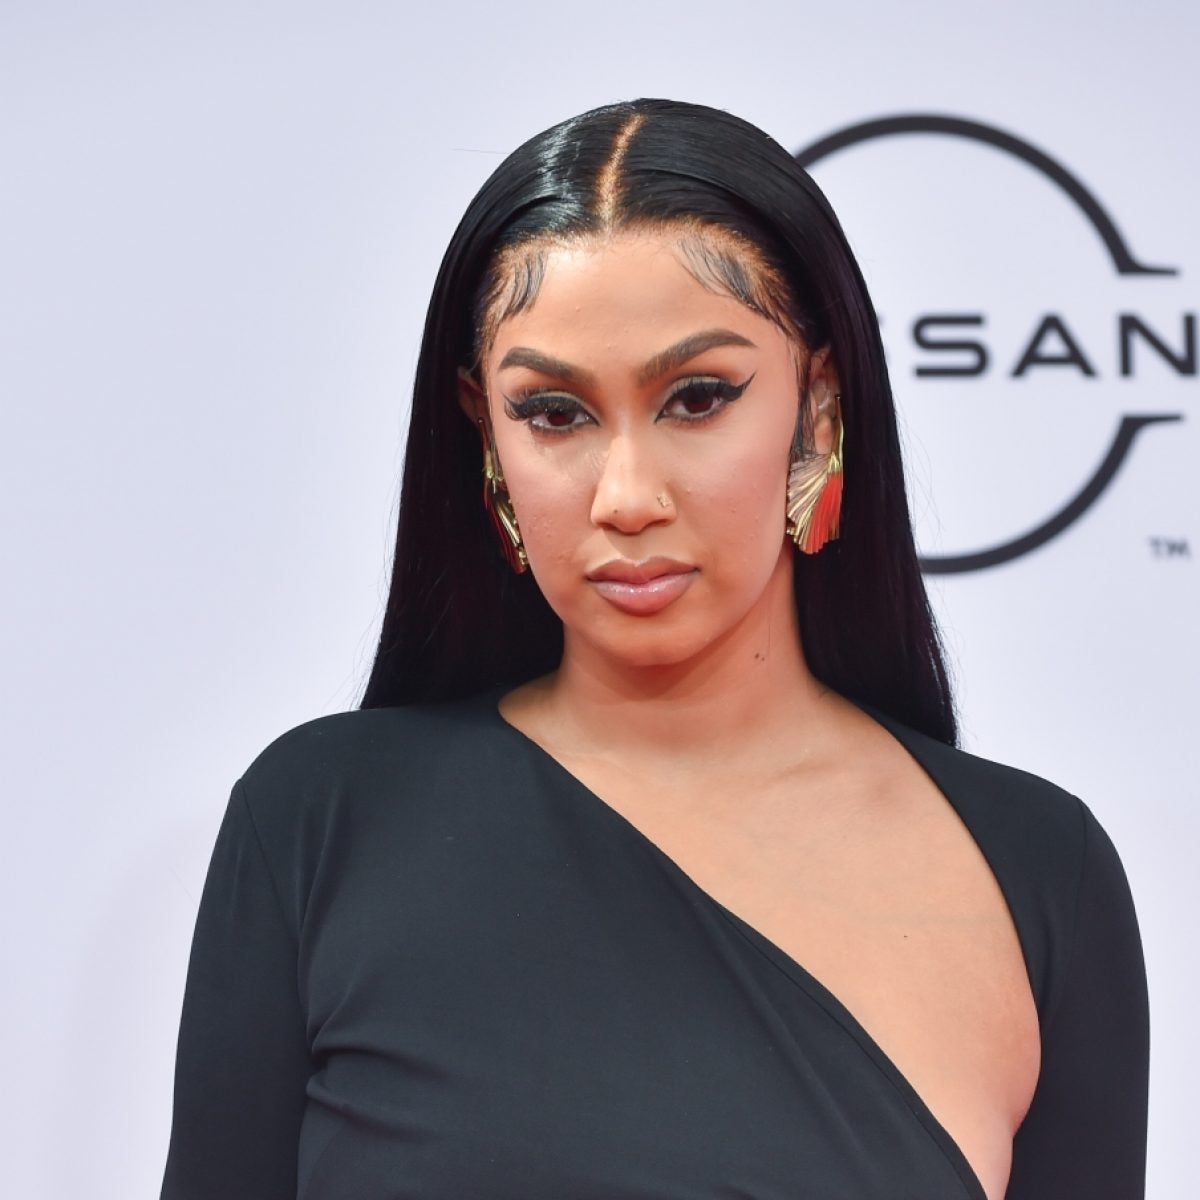 Queen Naija Is Considering A Legal Name Change